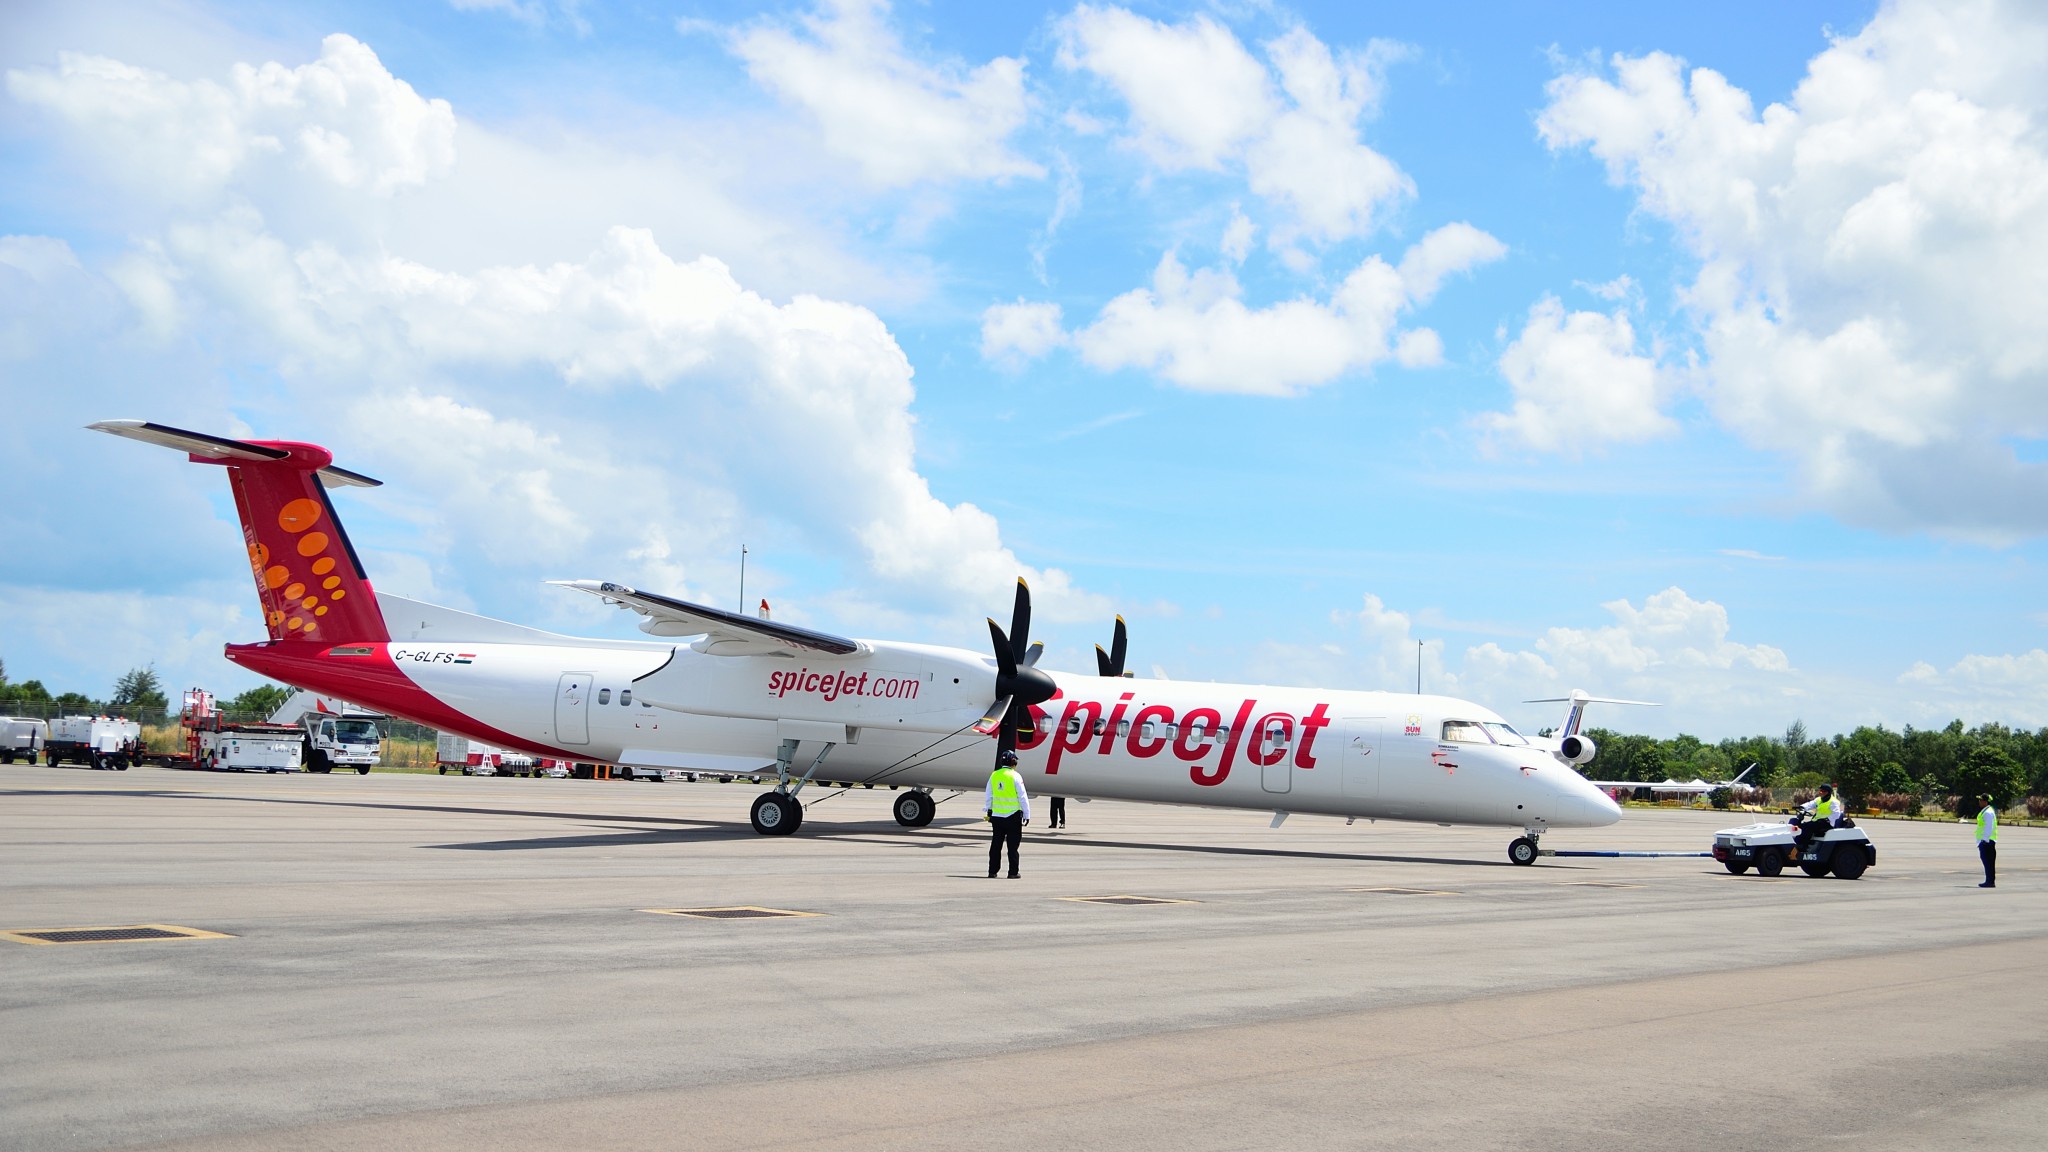 SpiceJet introduces new routes and posts shares rise